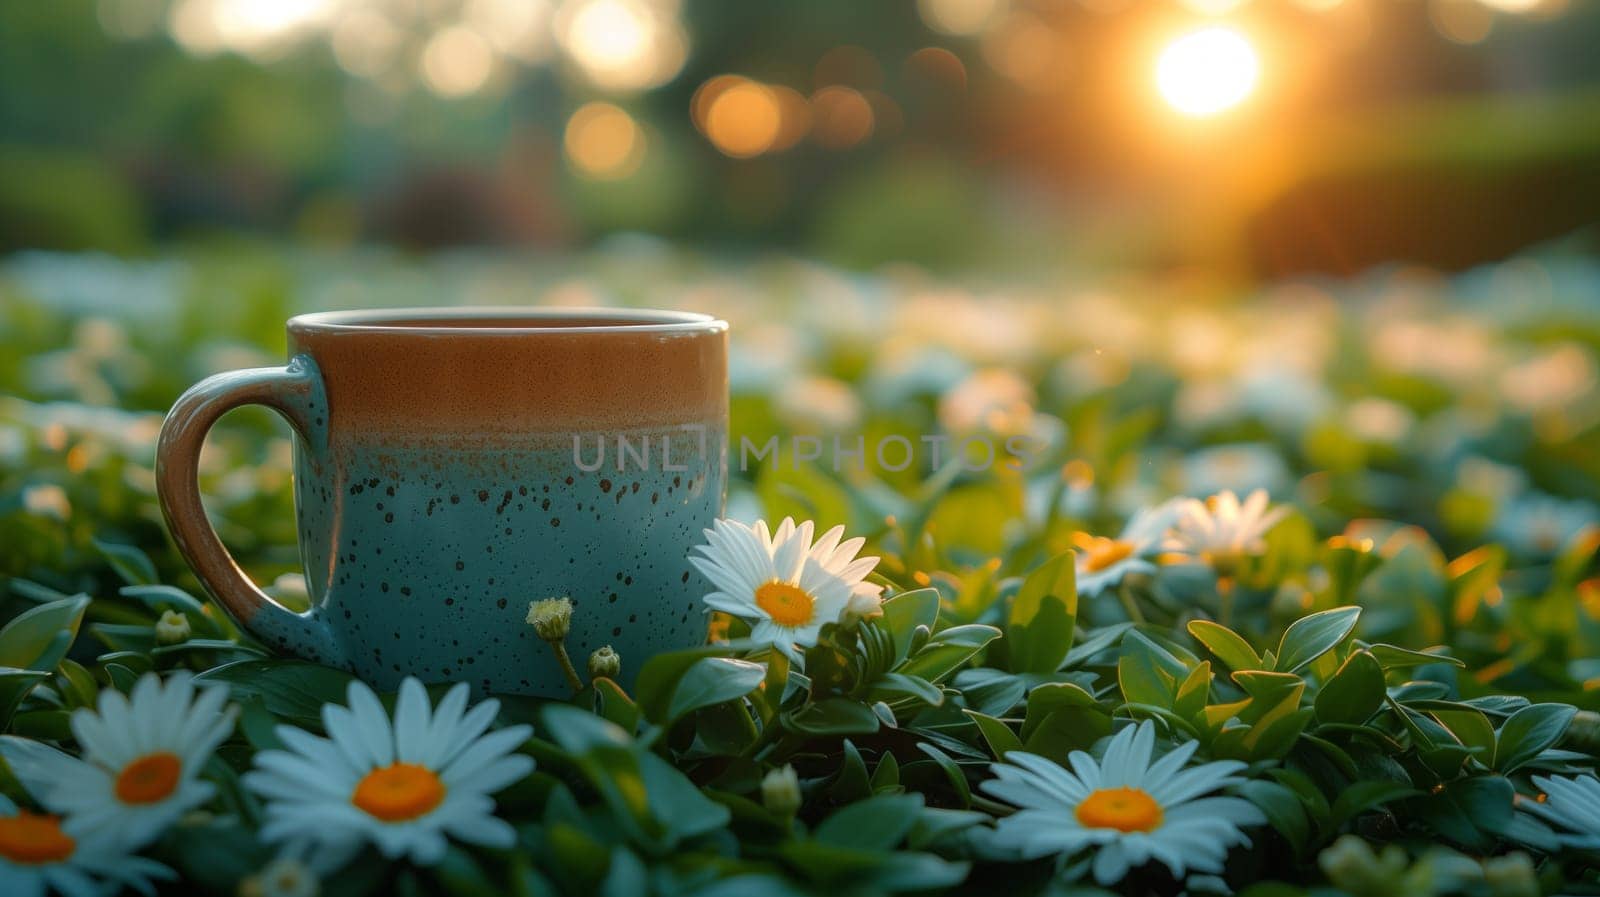 A coffee cup is placed amidst a field of daisies, bathed in the warm light of the sunset, blending with the greenery of nature